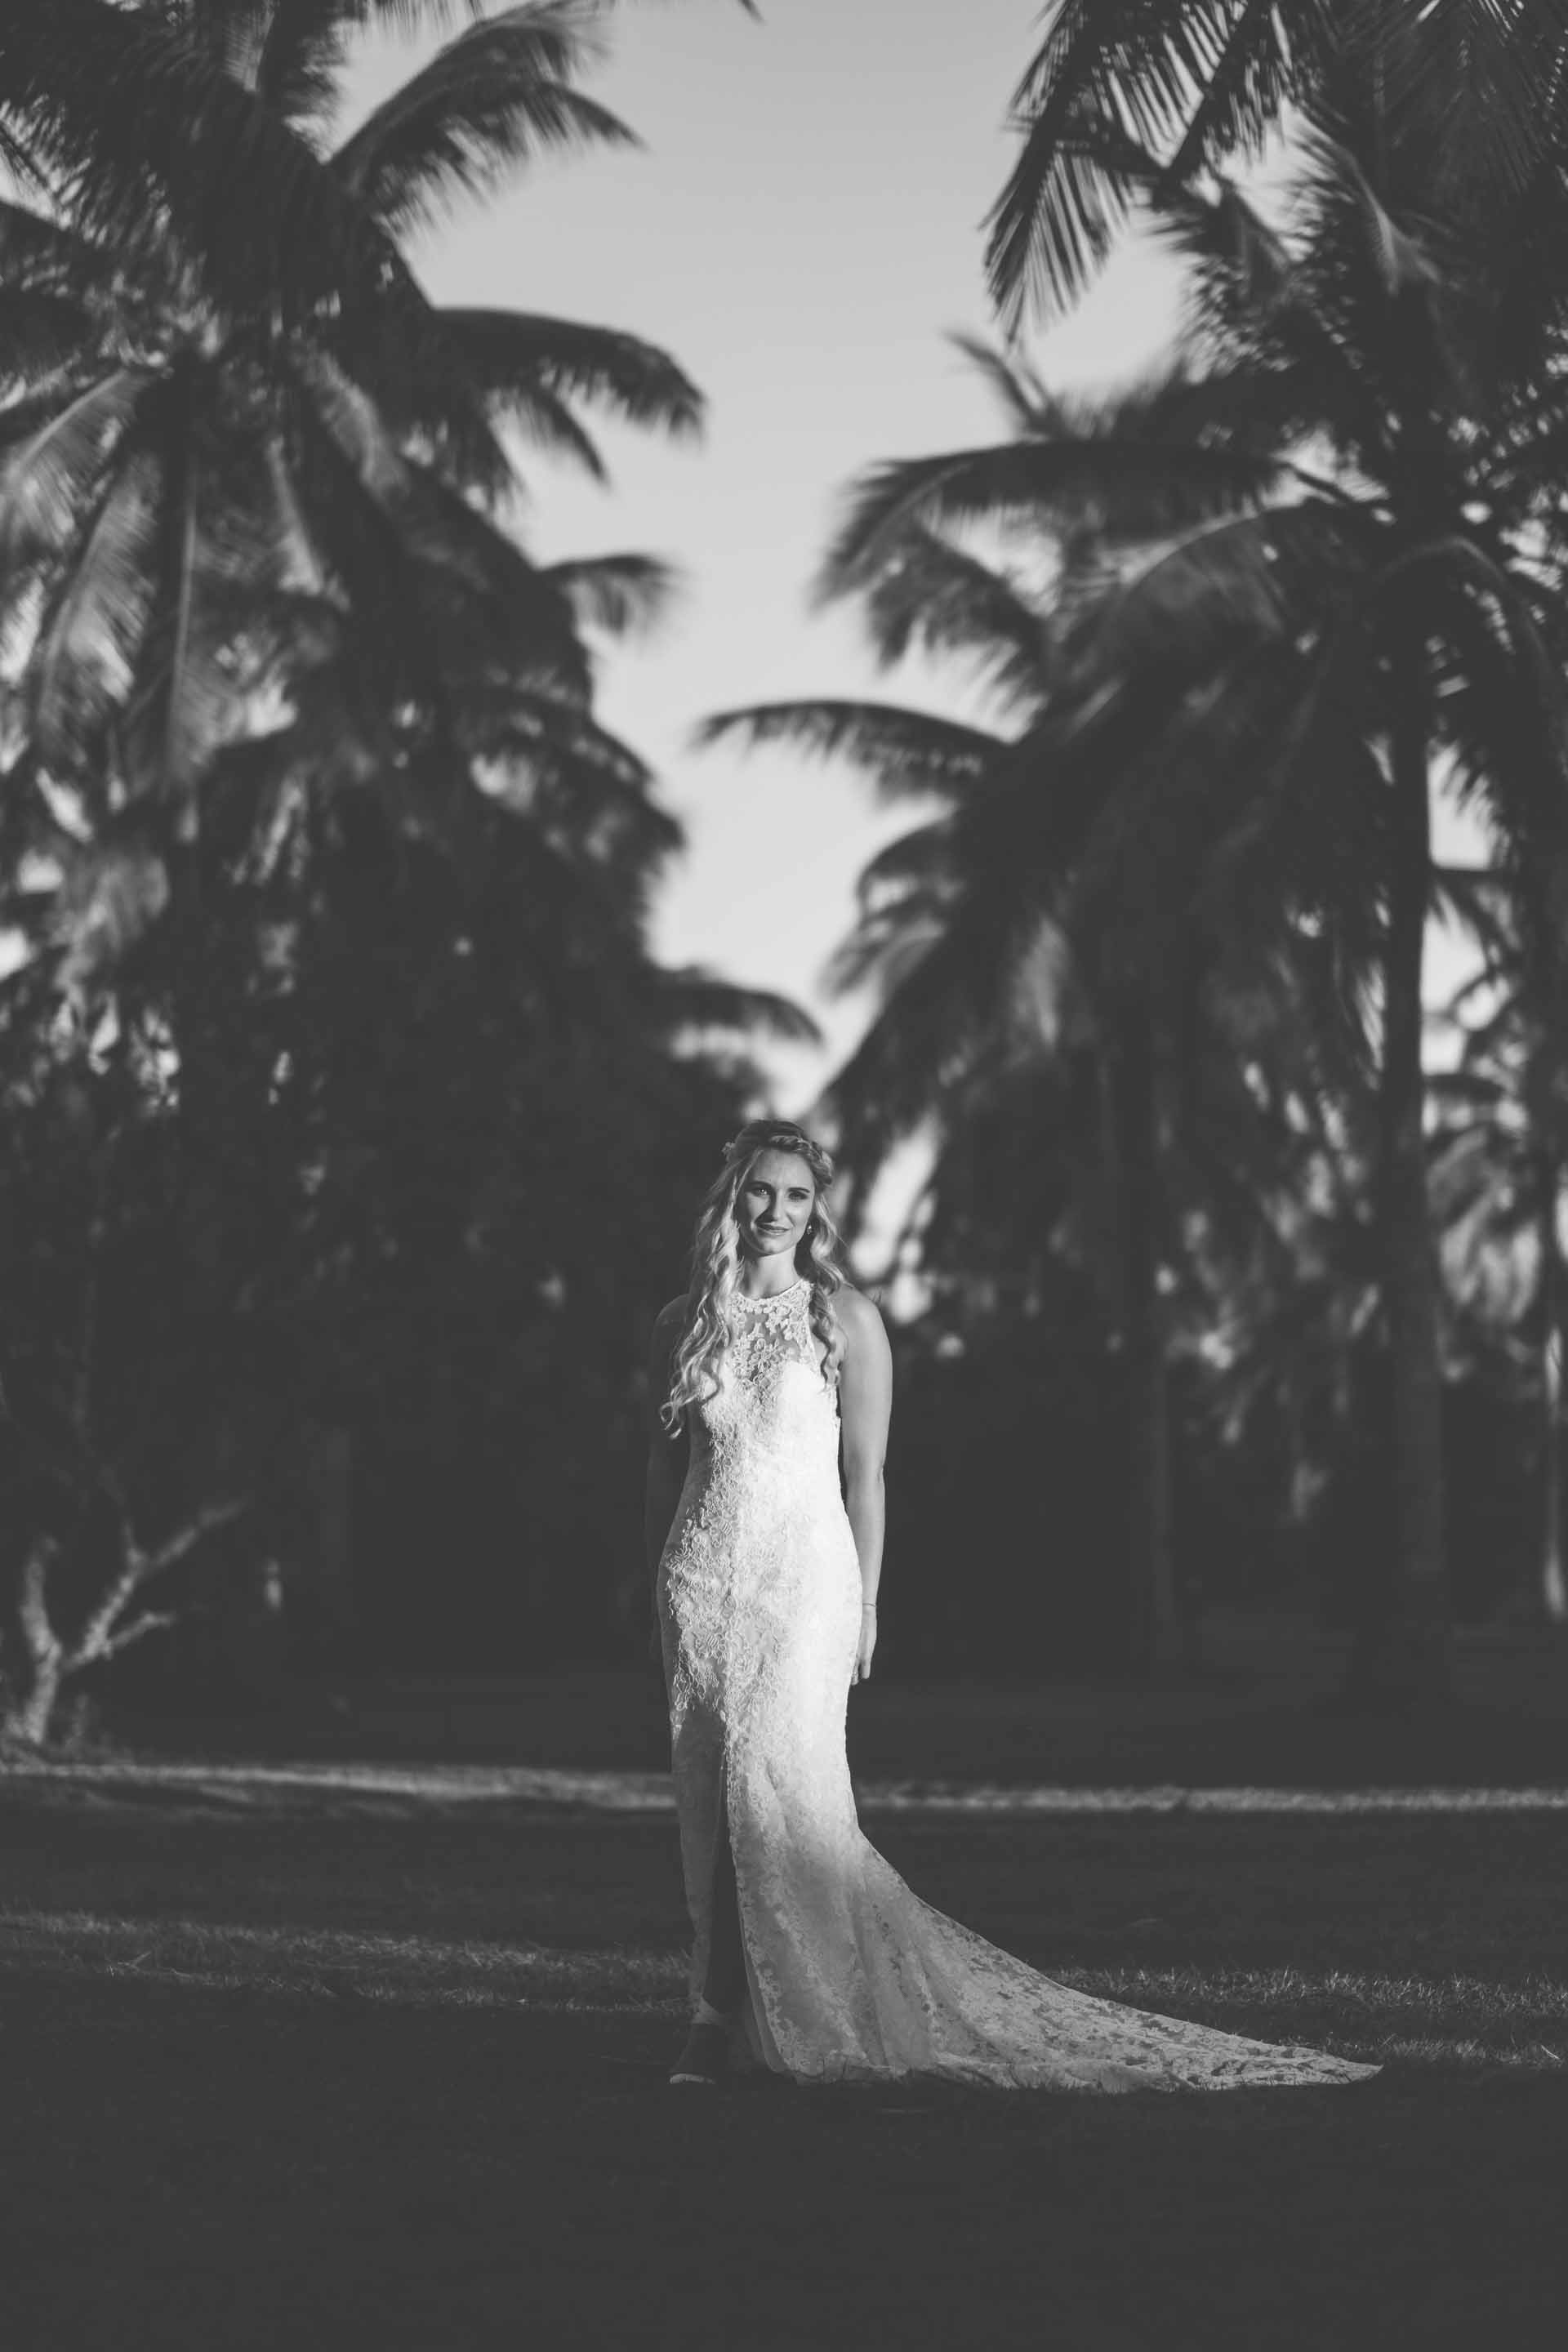 full length portrait of the bride between rows of coconut trees in black and white